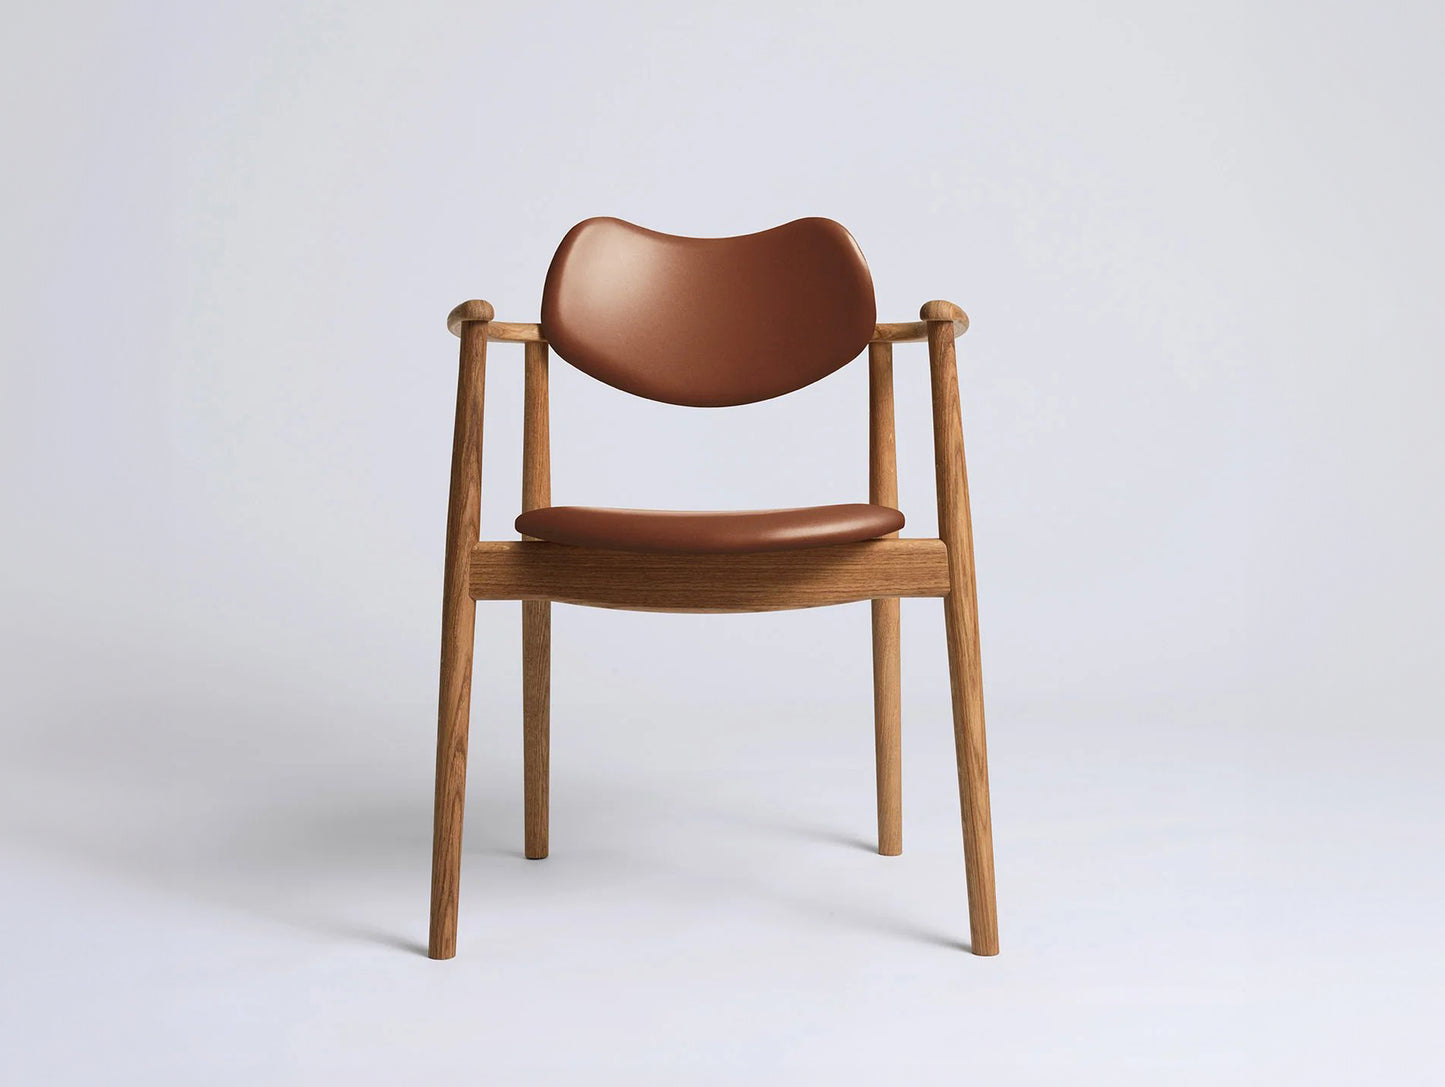 Regatta Chair Seat and Back Upholstered by Ro Collection - Oiled Oak / Supreme Cognac Leather